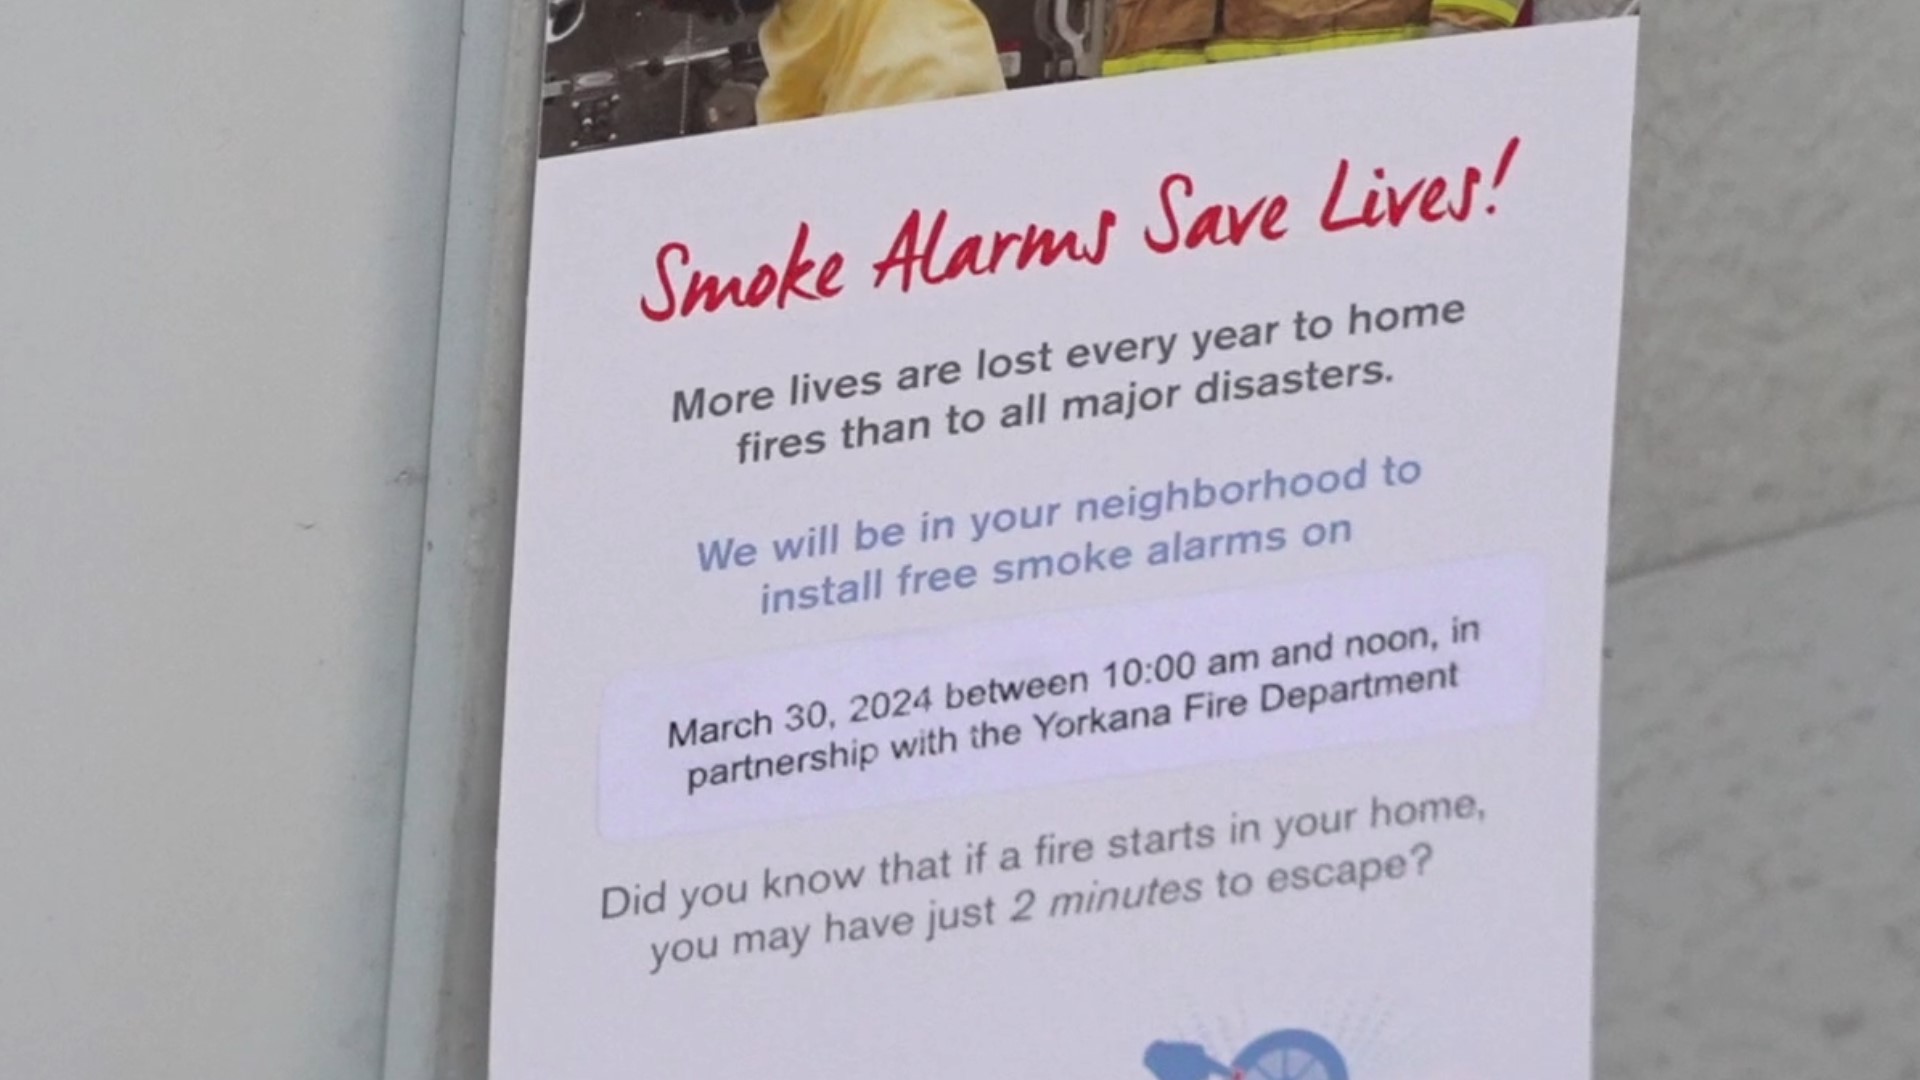 Smoke detectors reduce deaths via fire by 50%, according to the Red Cross.